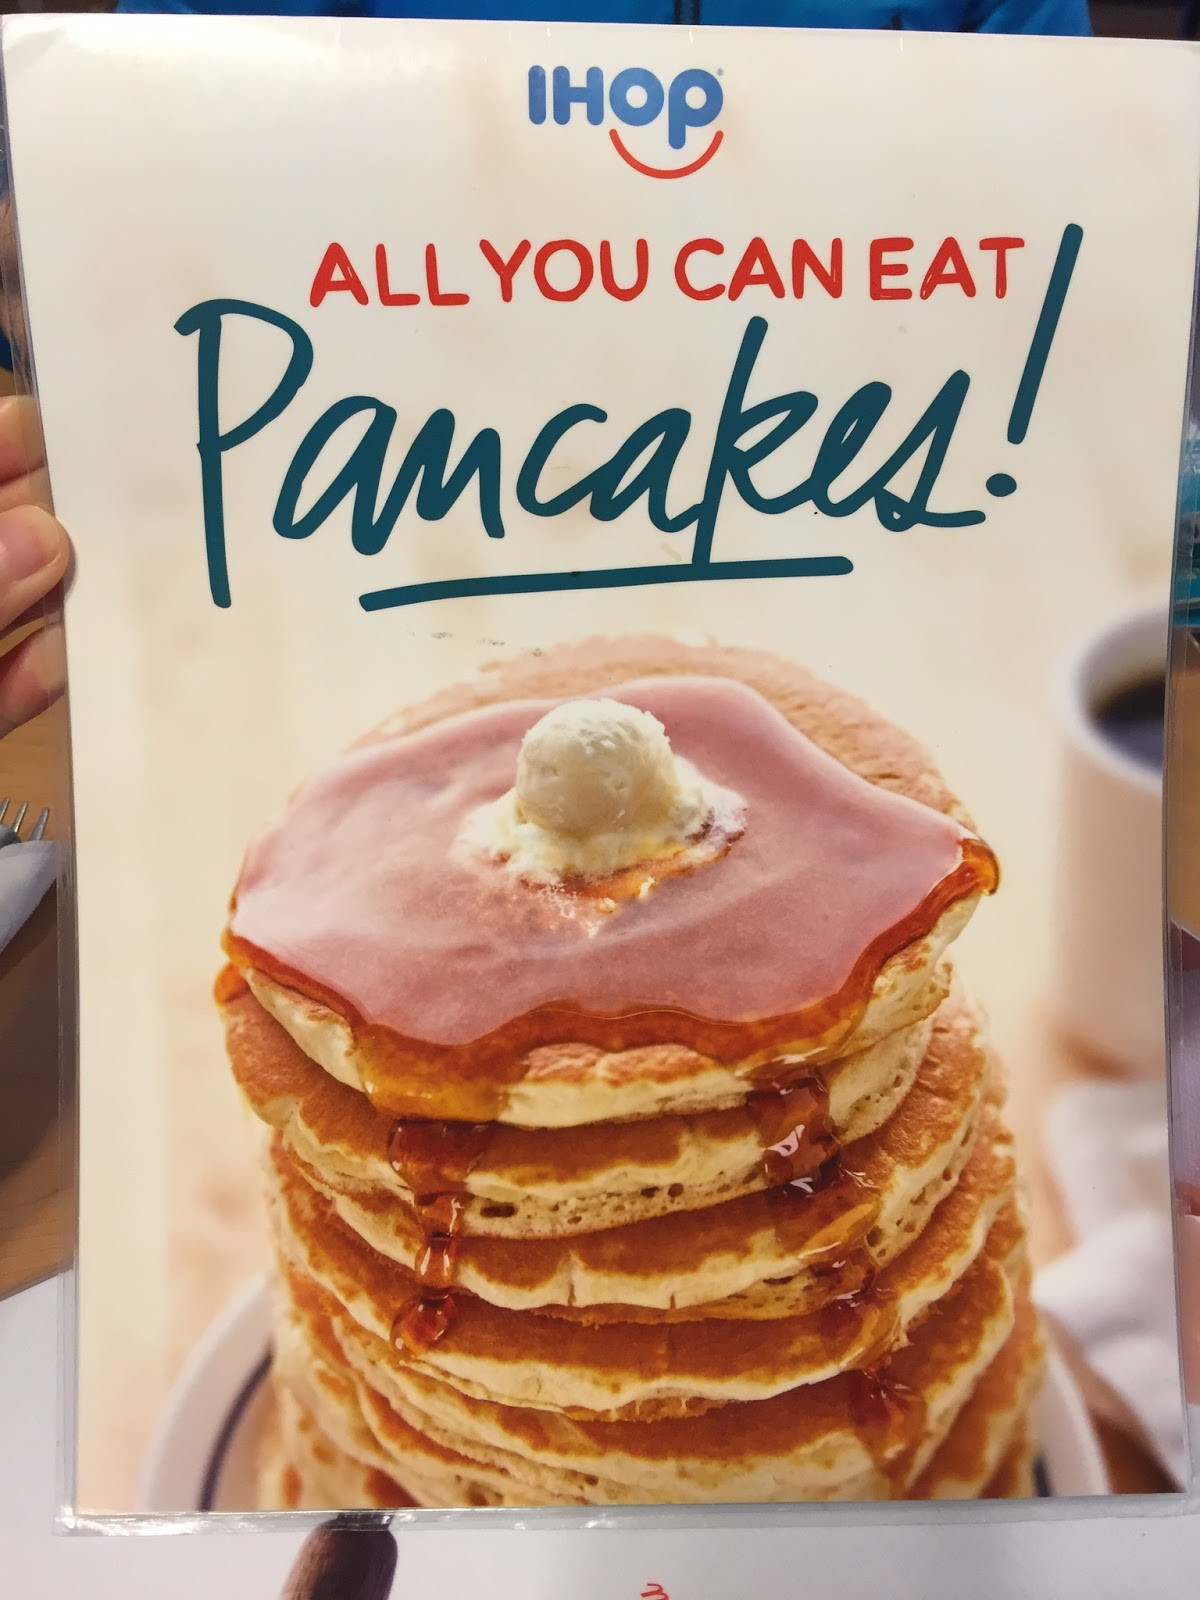 Ihop All You Can Eat Pancakes
 All You Can Eat Pancakes At IHOP アイホップのパンケーキ食べ放題 I m